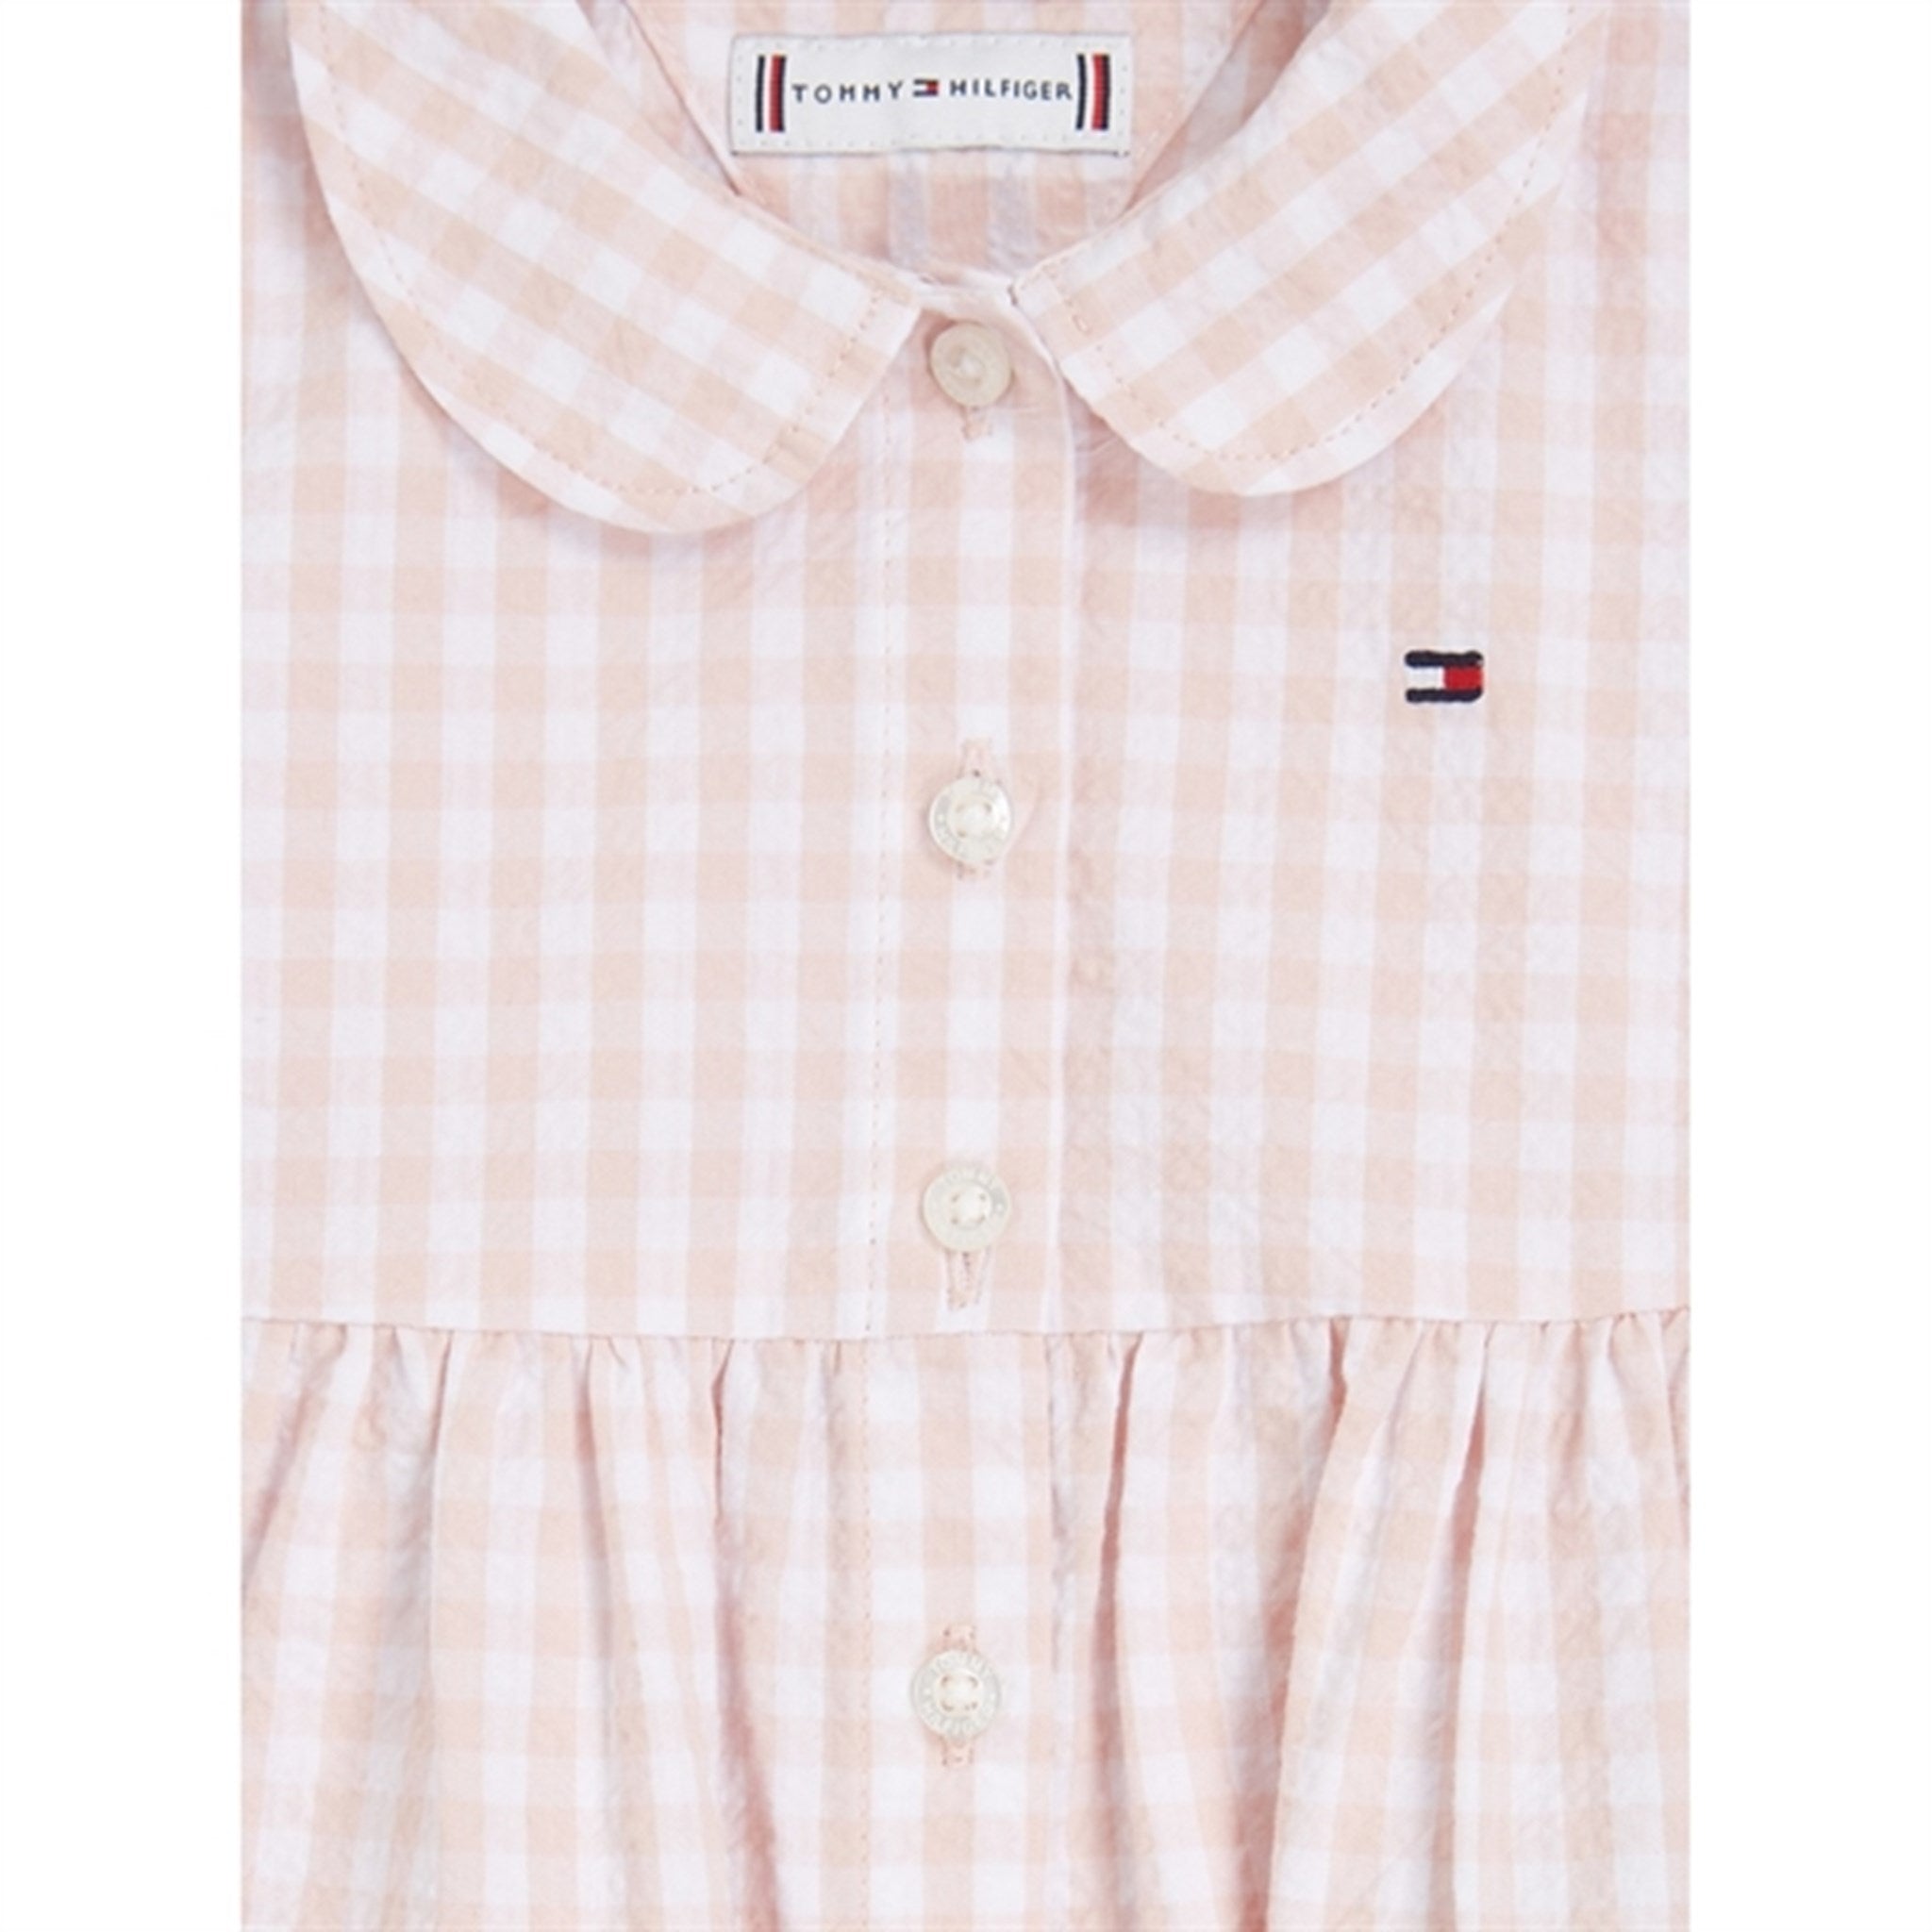 Tommy Hilfiger Baby Gingham Dress White / Pink Check 2